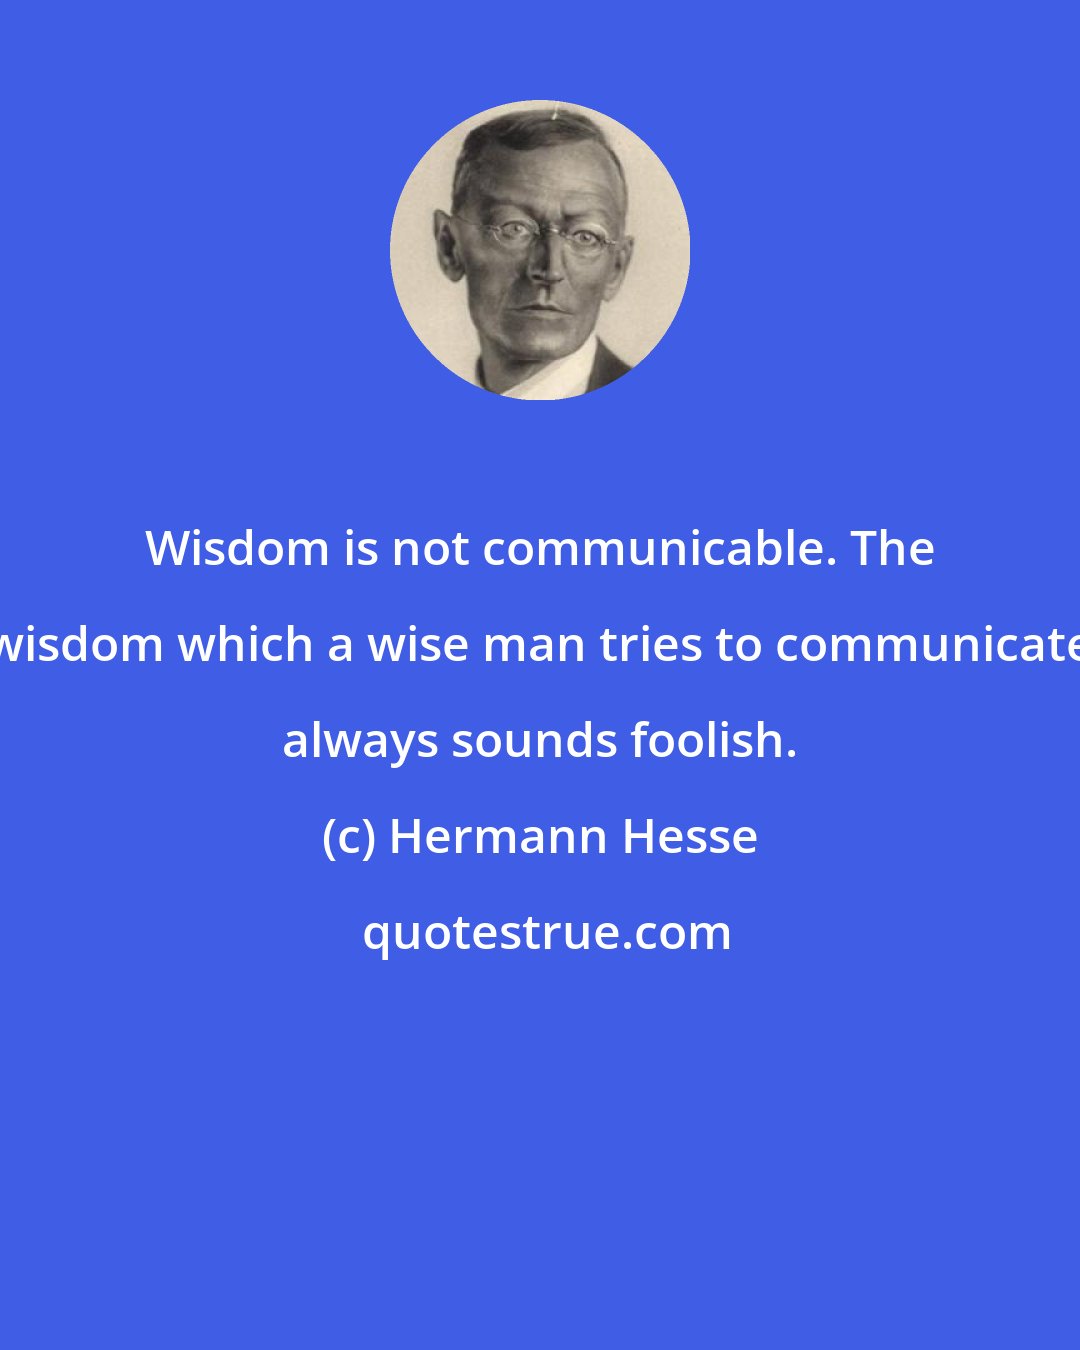 Hermann Hesse: Wisdom is not communicable. The wisdom which a wise man tries to communicate always sounds foolish.